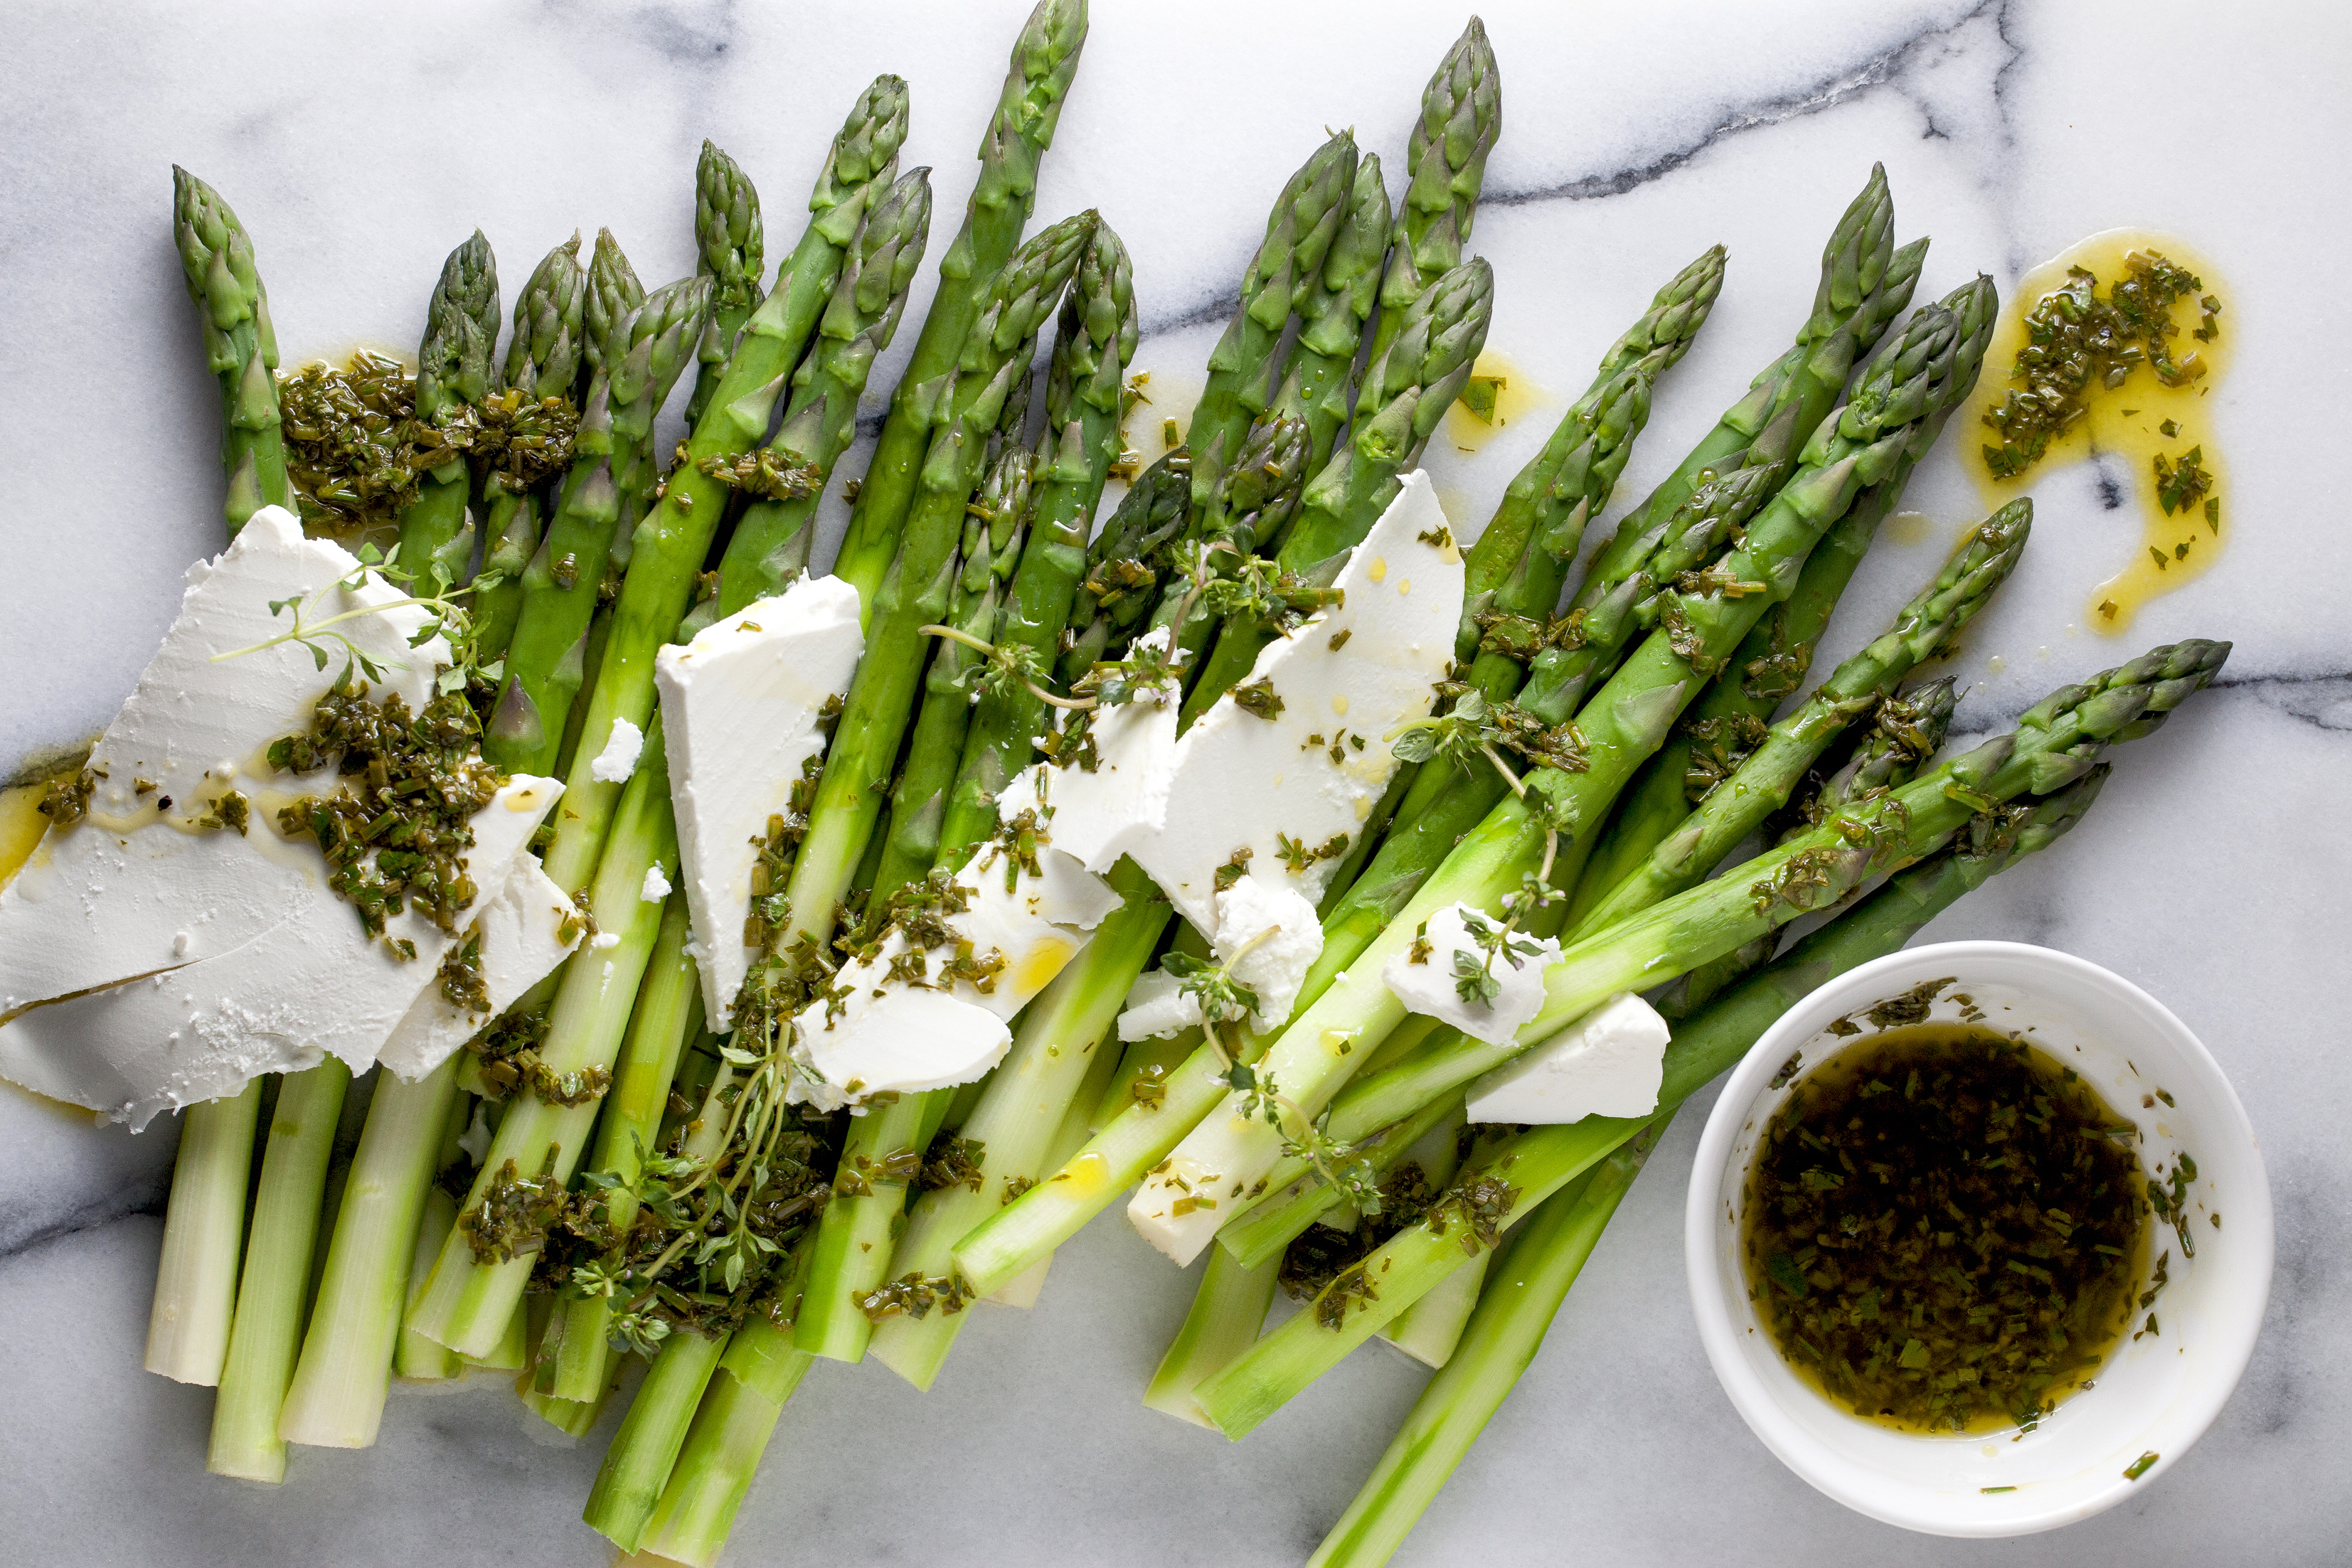 Asparagus salad recipe by Teresa Cutter of The Healthy Chef. (Paul Cutter / The Healthy Chef)